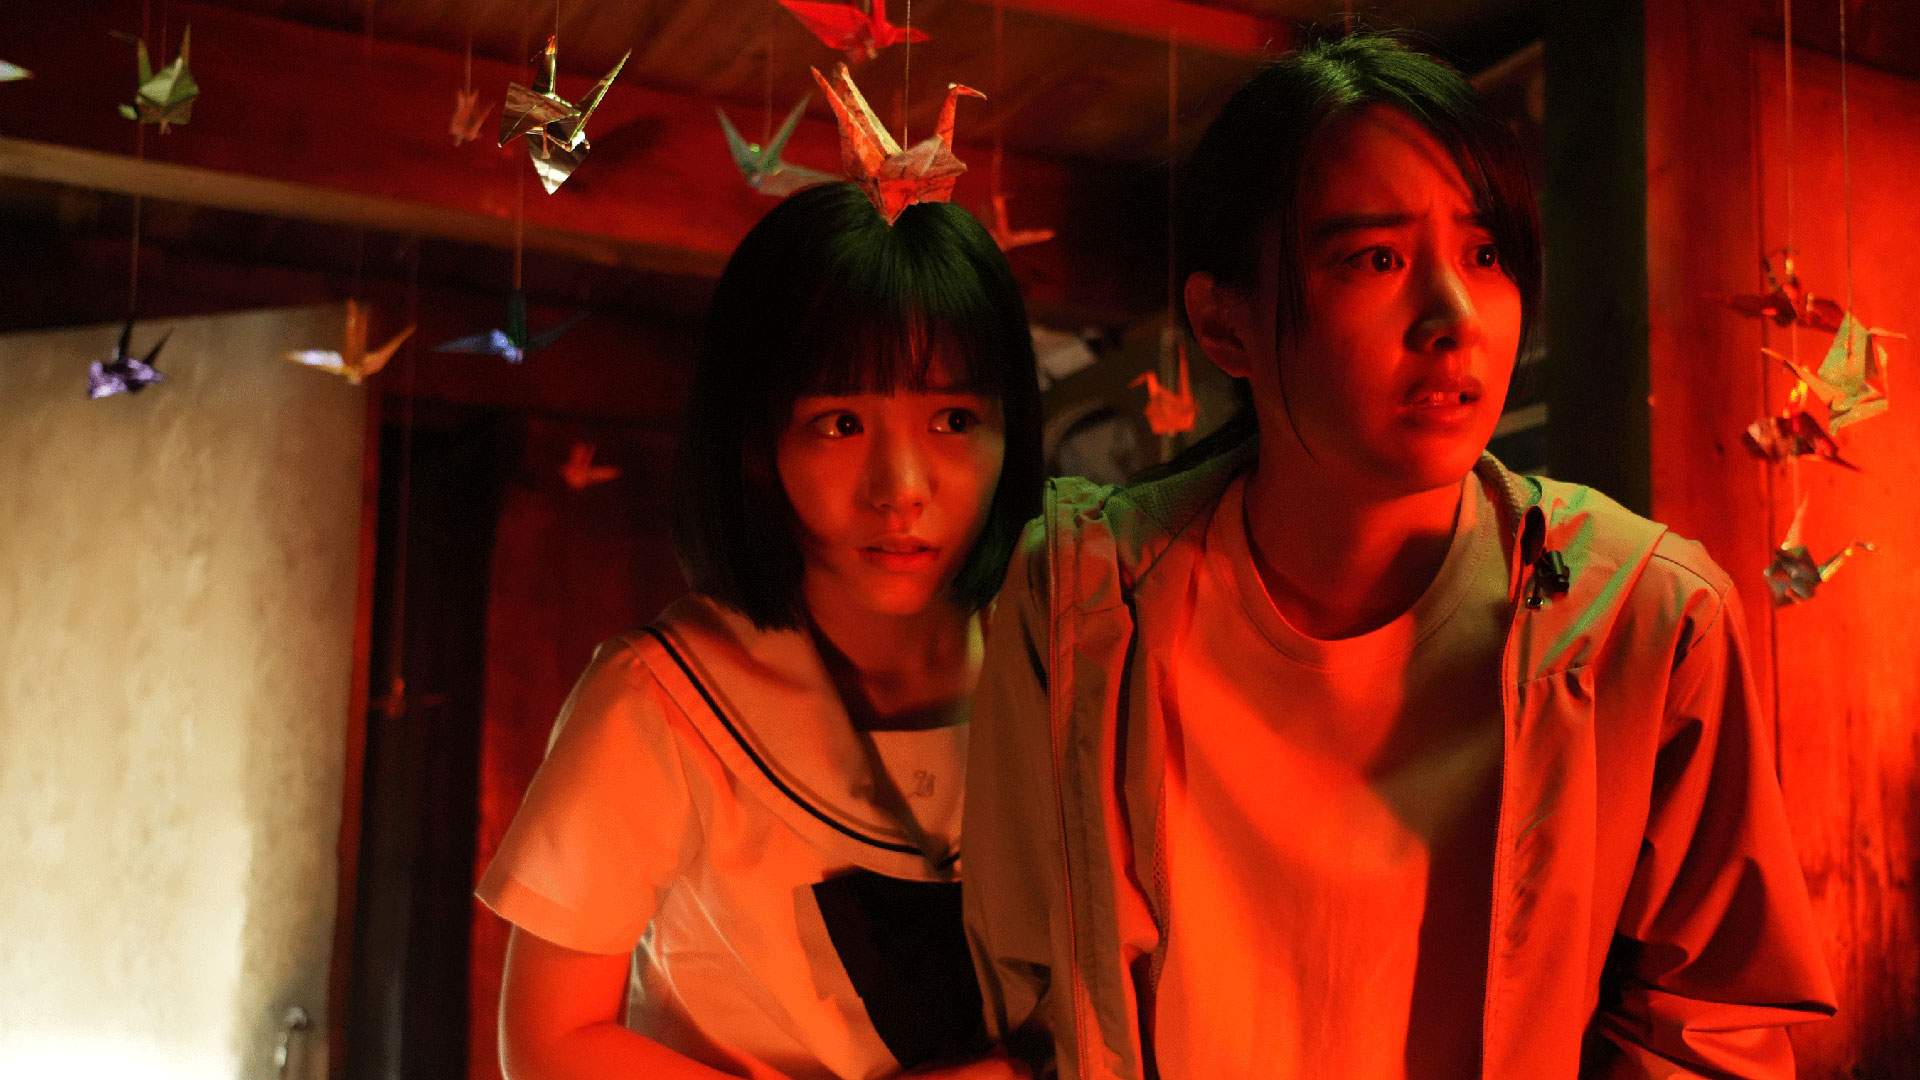 The Latest J-Horror Movies by the Directors of 'Ringu' and 'Ju-On' Lead 2023's Japanese Film Festival Lineup